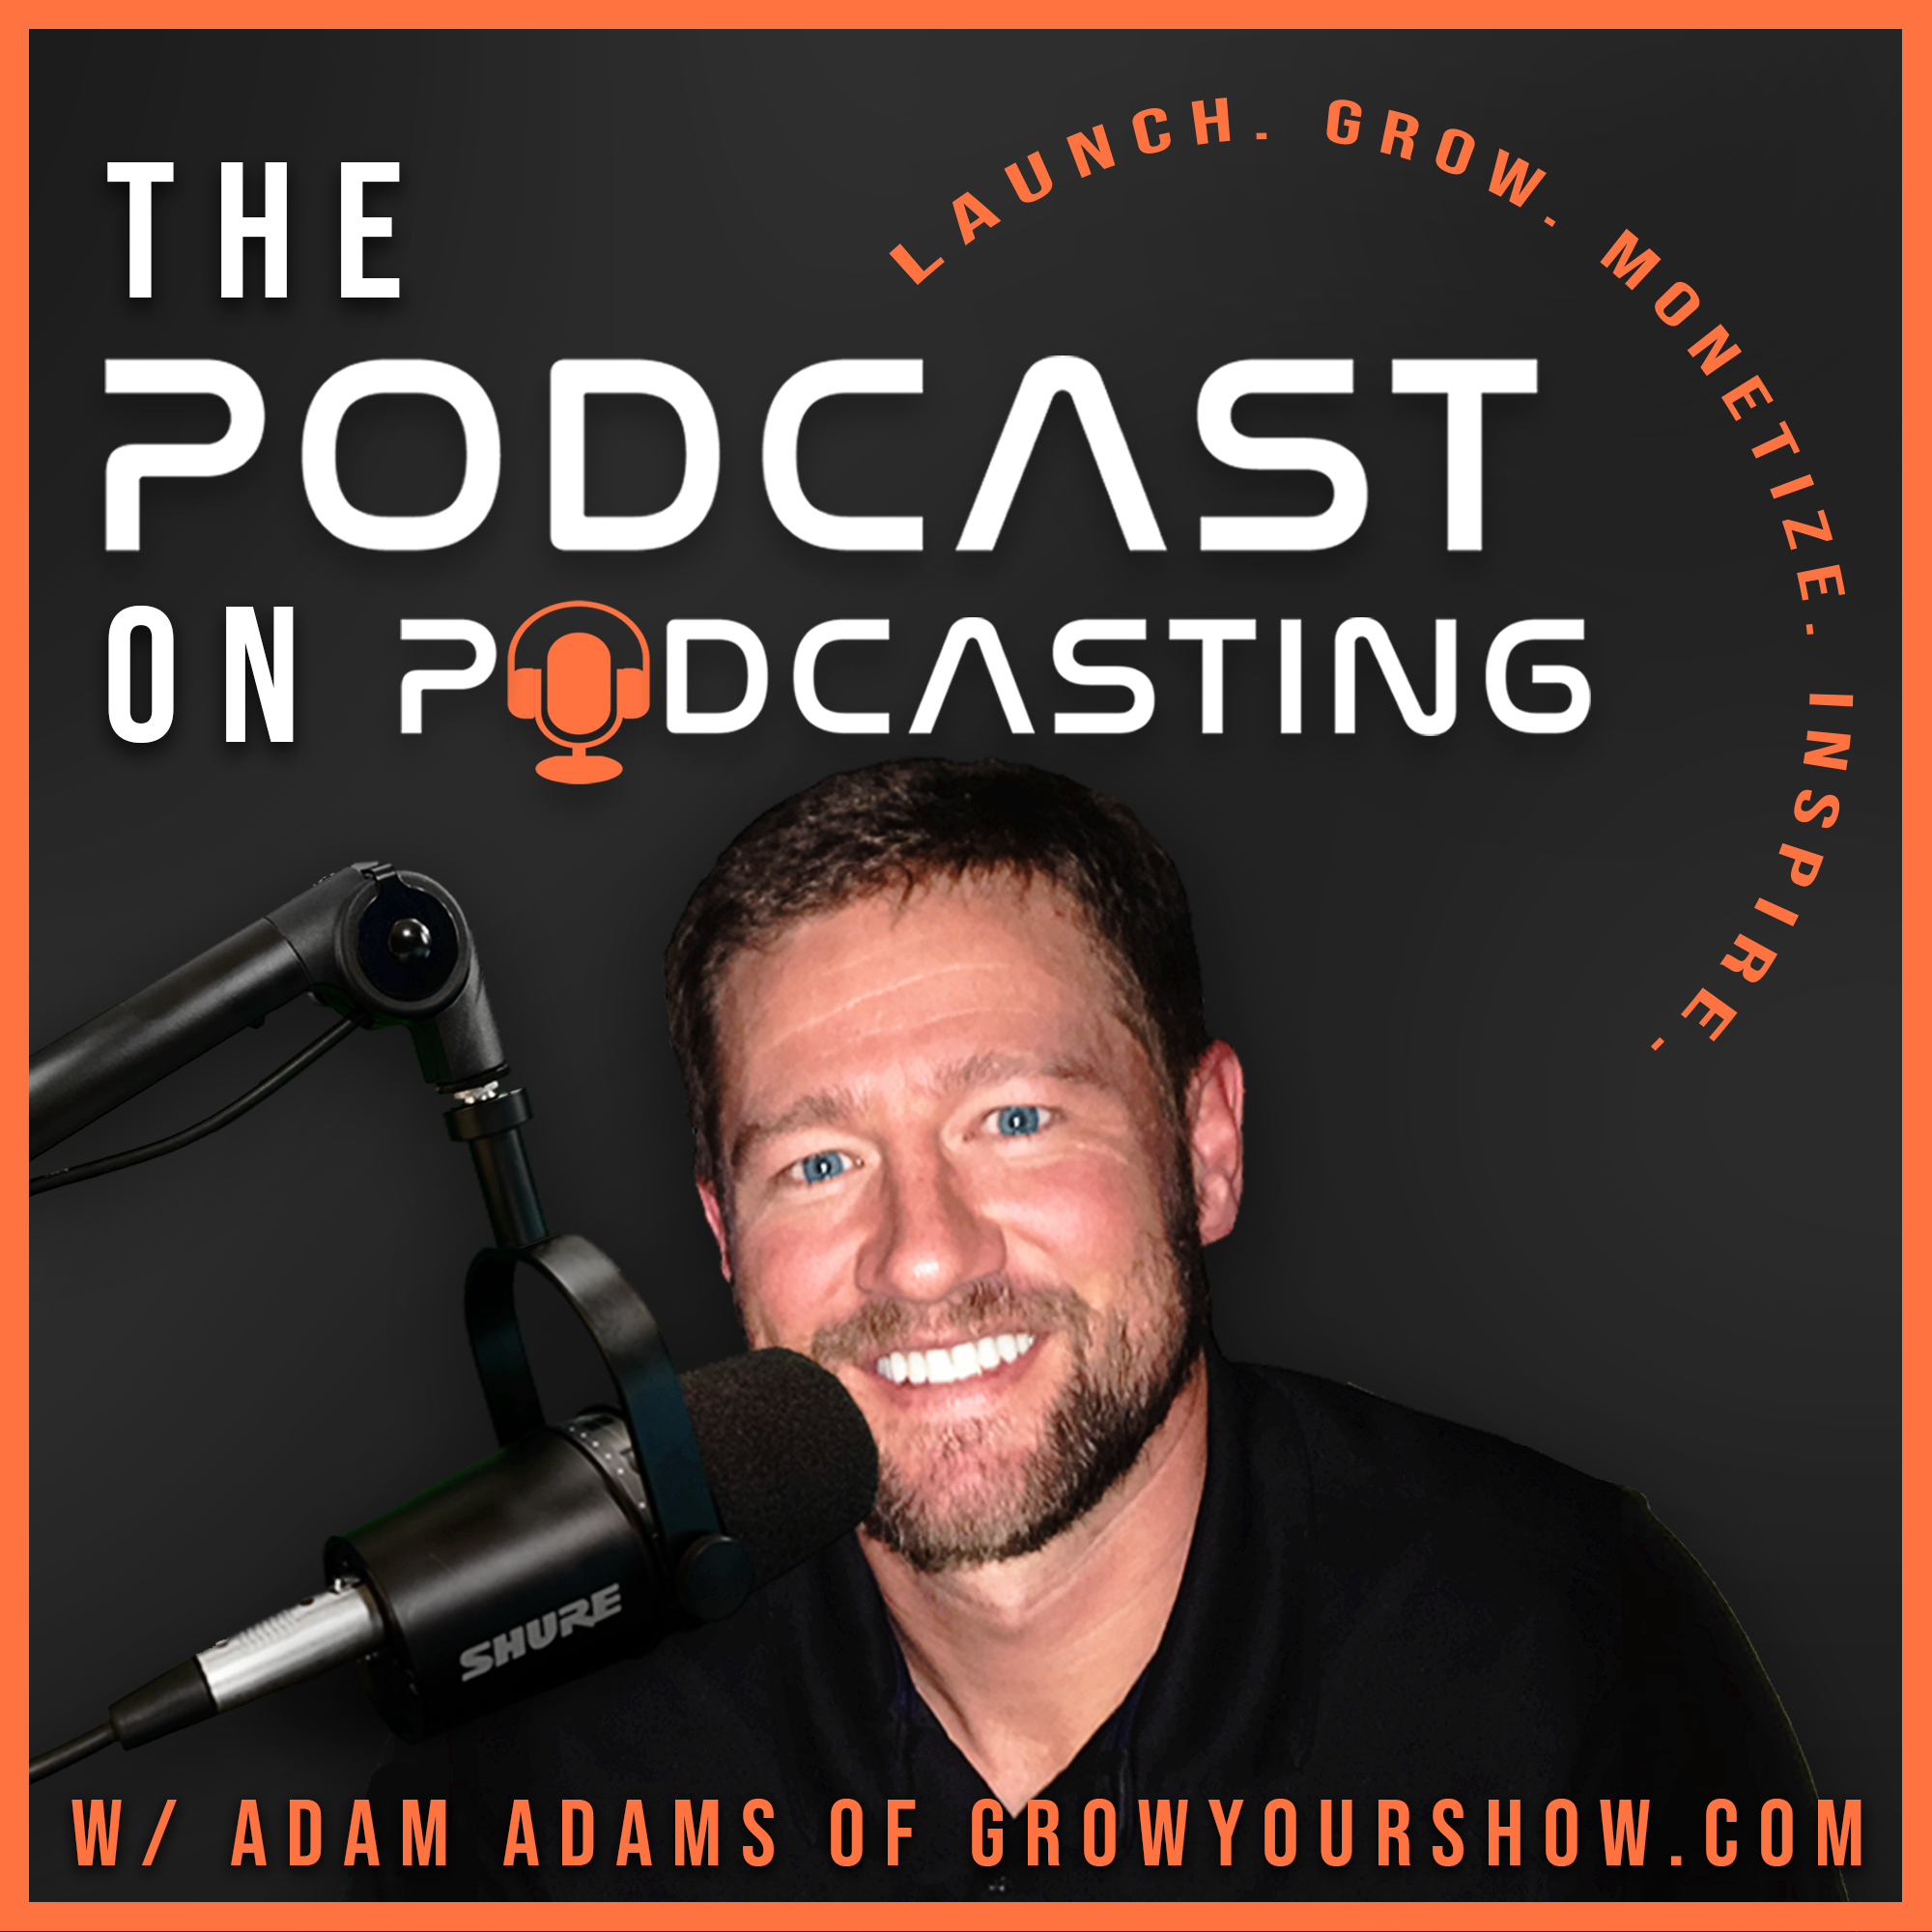 A highlight from Ep371: Don't Wait To Add Podcasting To Your Funnel - Lloyd J. Ross